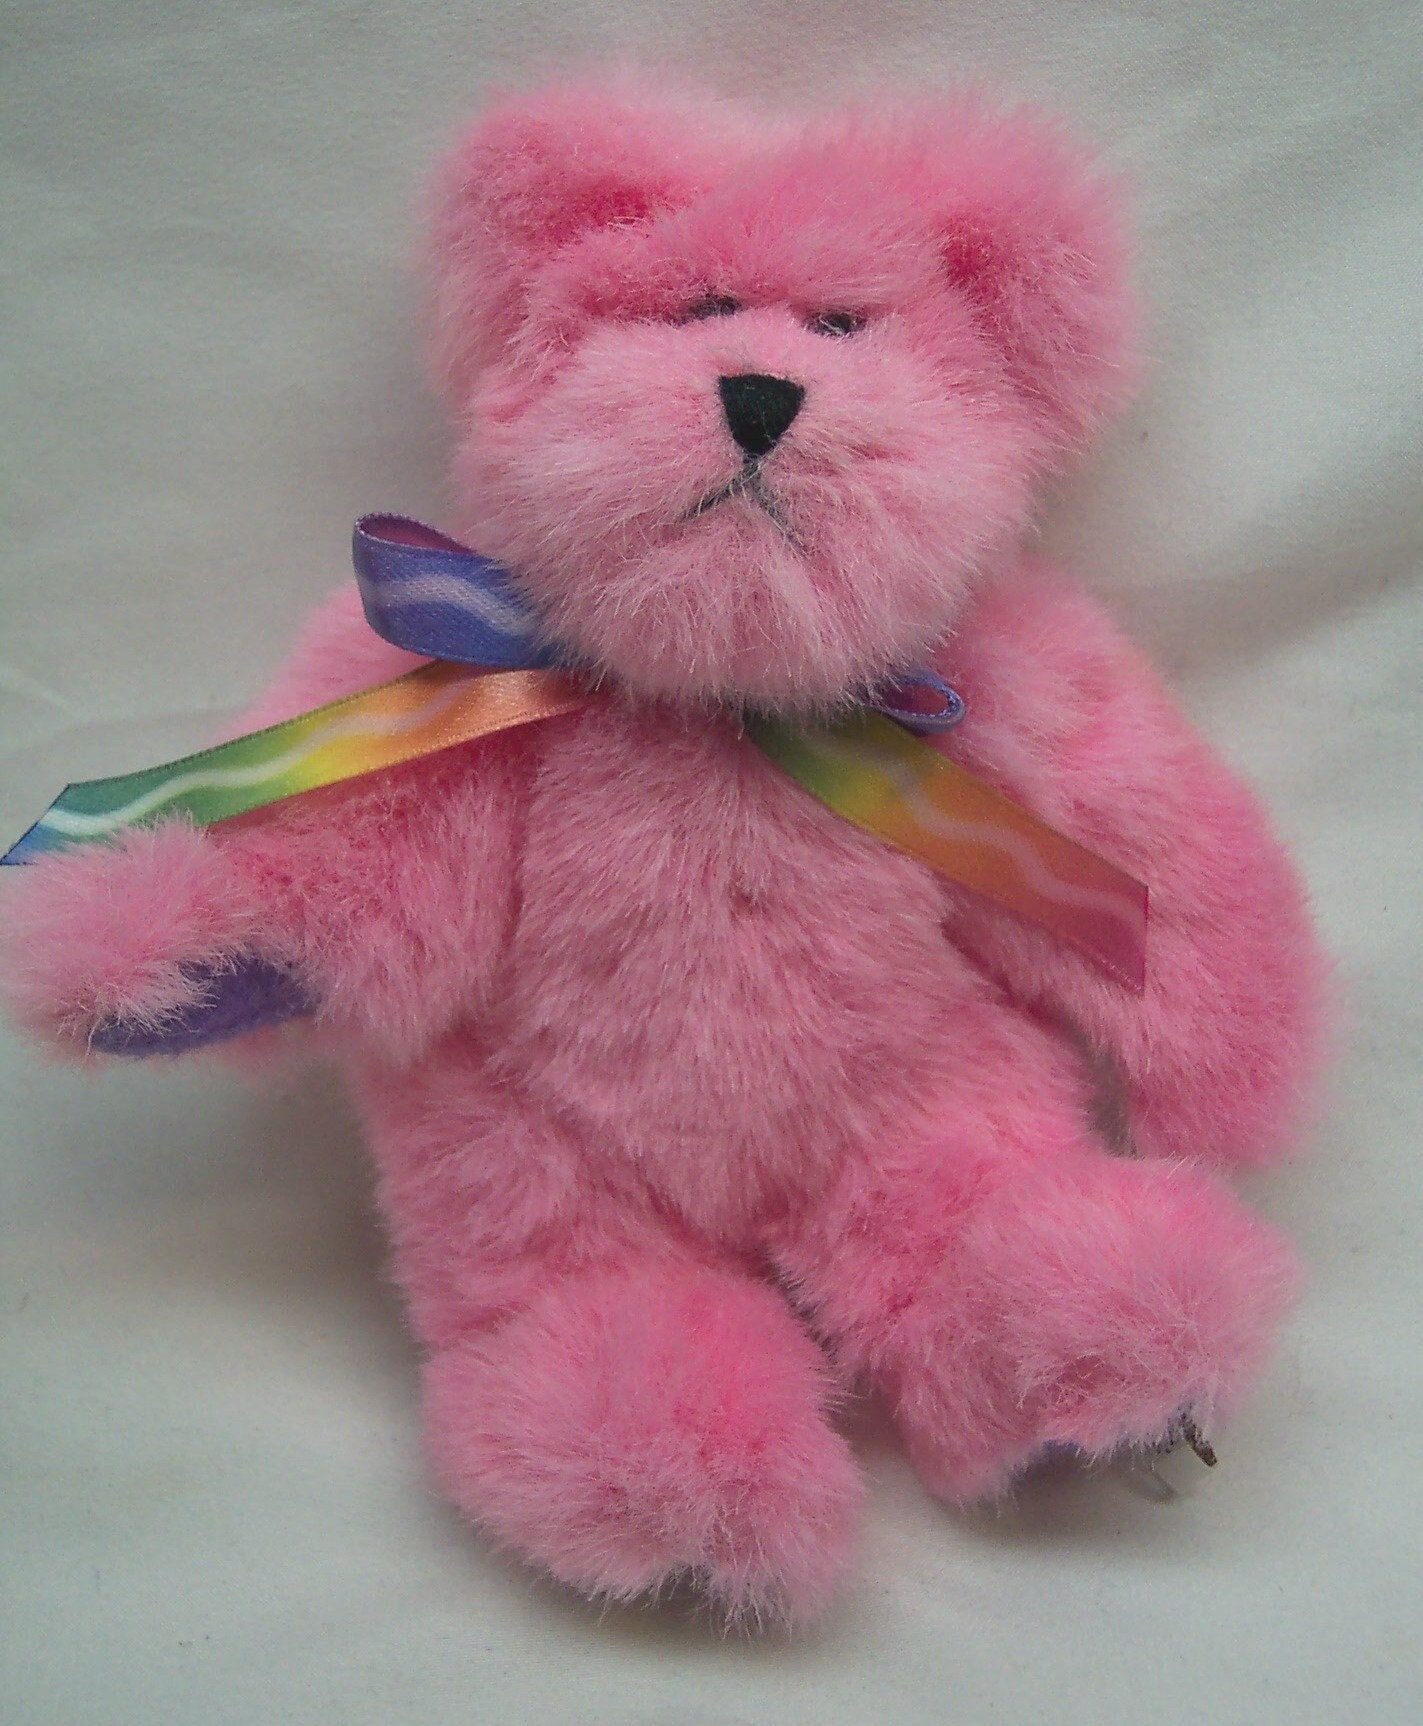 Teddy Bear Colorful Stackable Crayons 